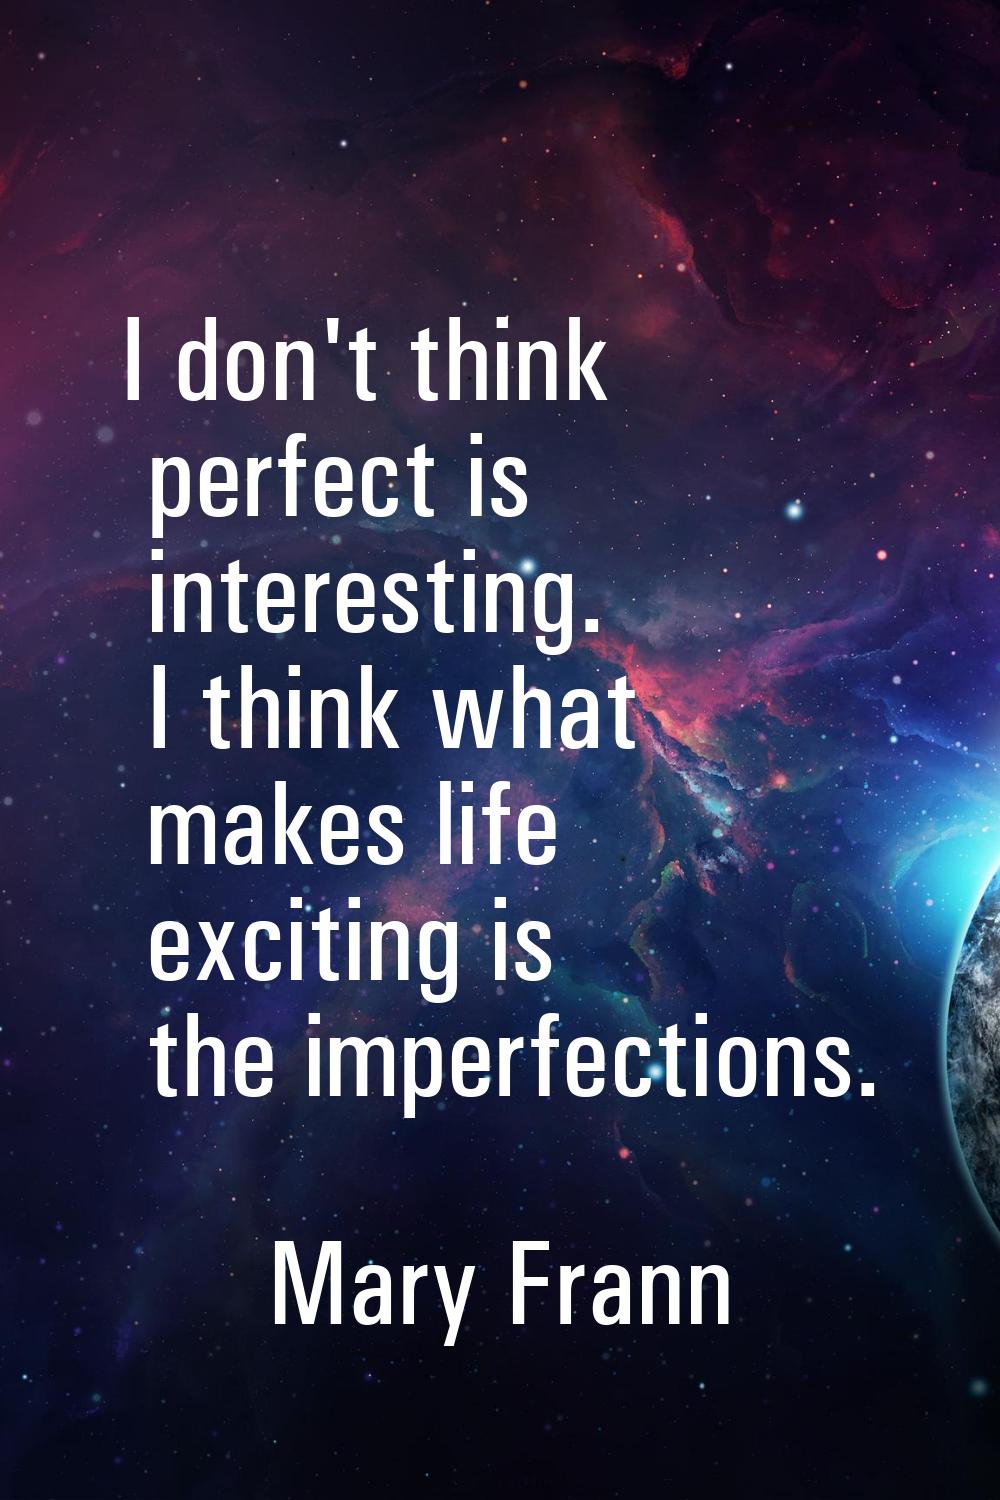 I don't think perfect is interesting. I think what makes life exciting is the imperfections.